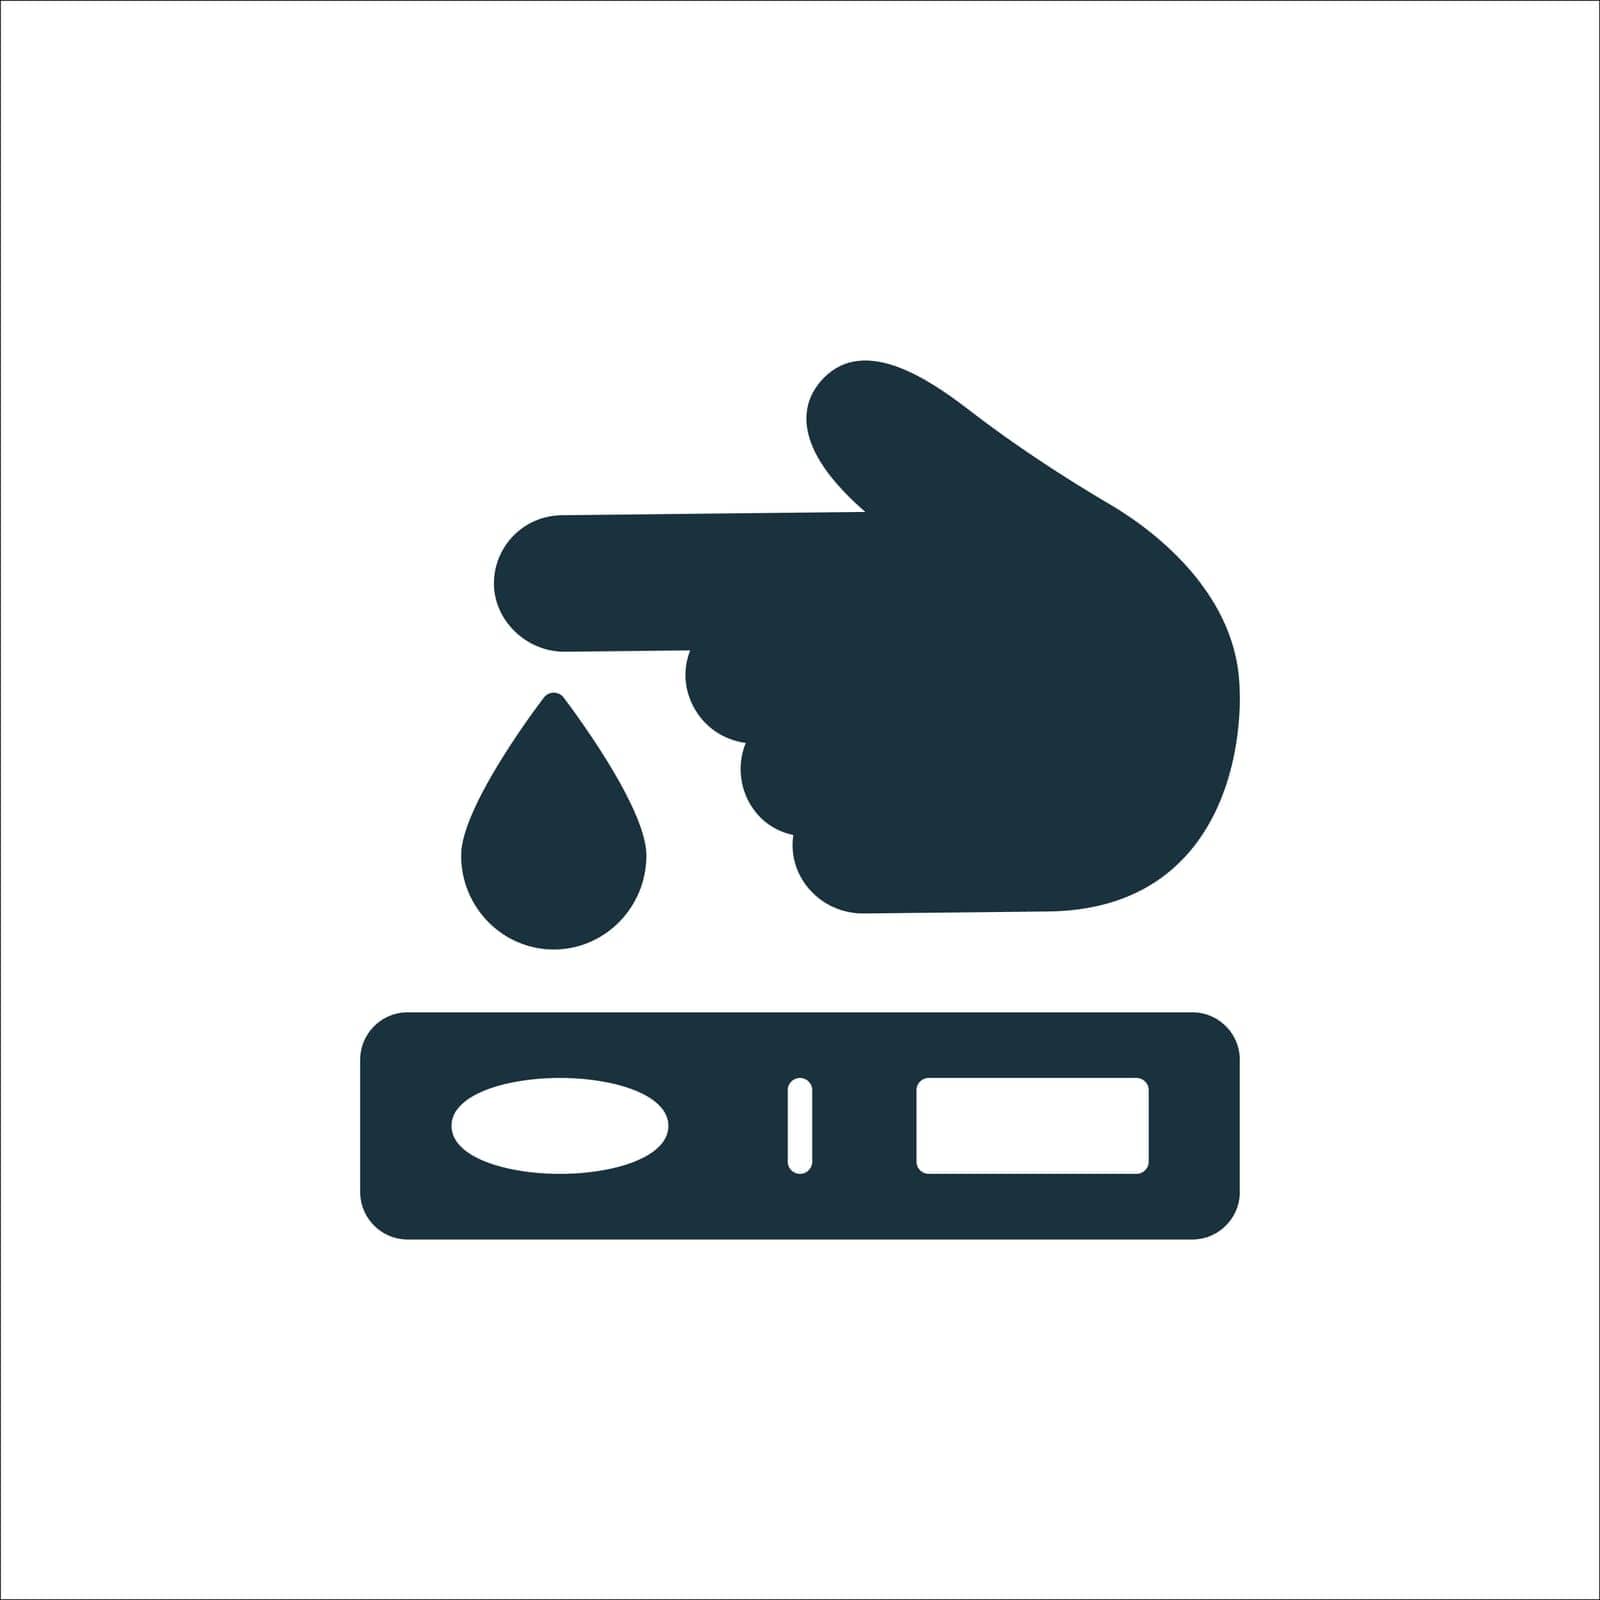 Finger Blood Test Silhouette Icon. Blood Sugar Analysis Pictogram. Research of Level Glucose Glyph Icon. Tests of Glycemia in Diabetes. Isolated Vector Illustration.